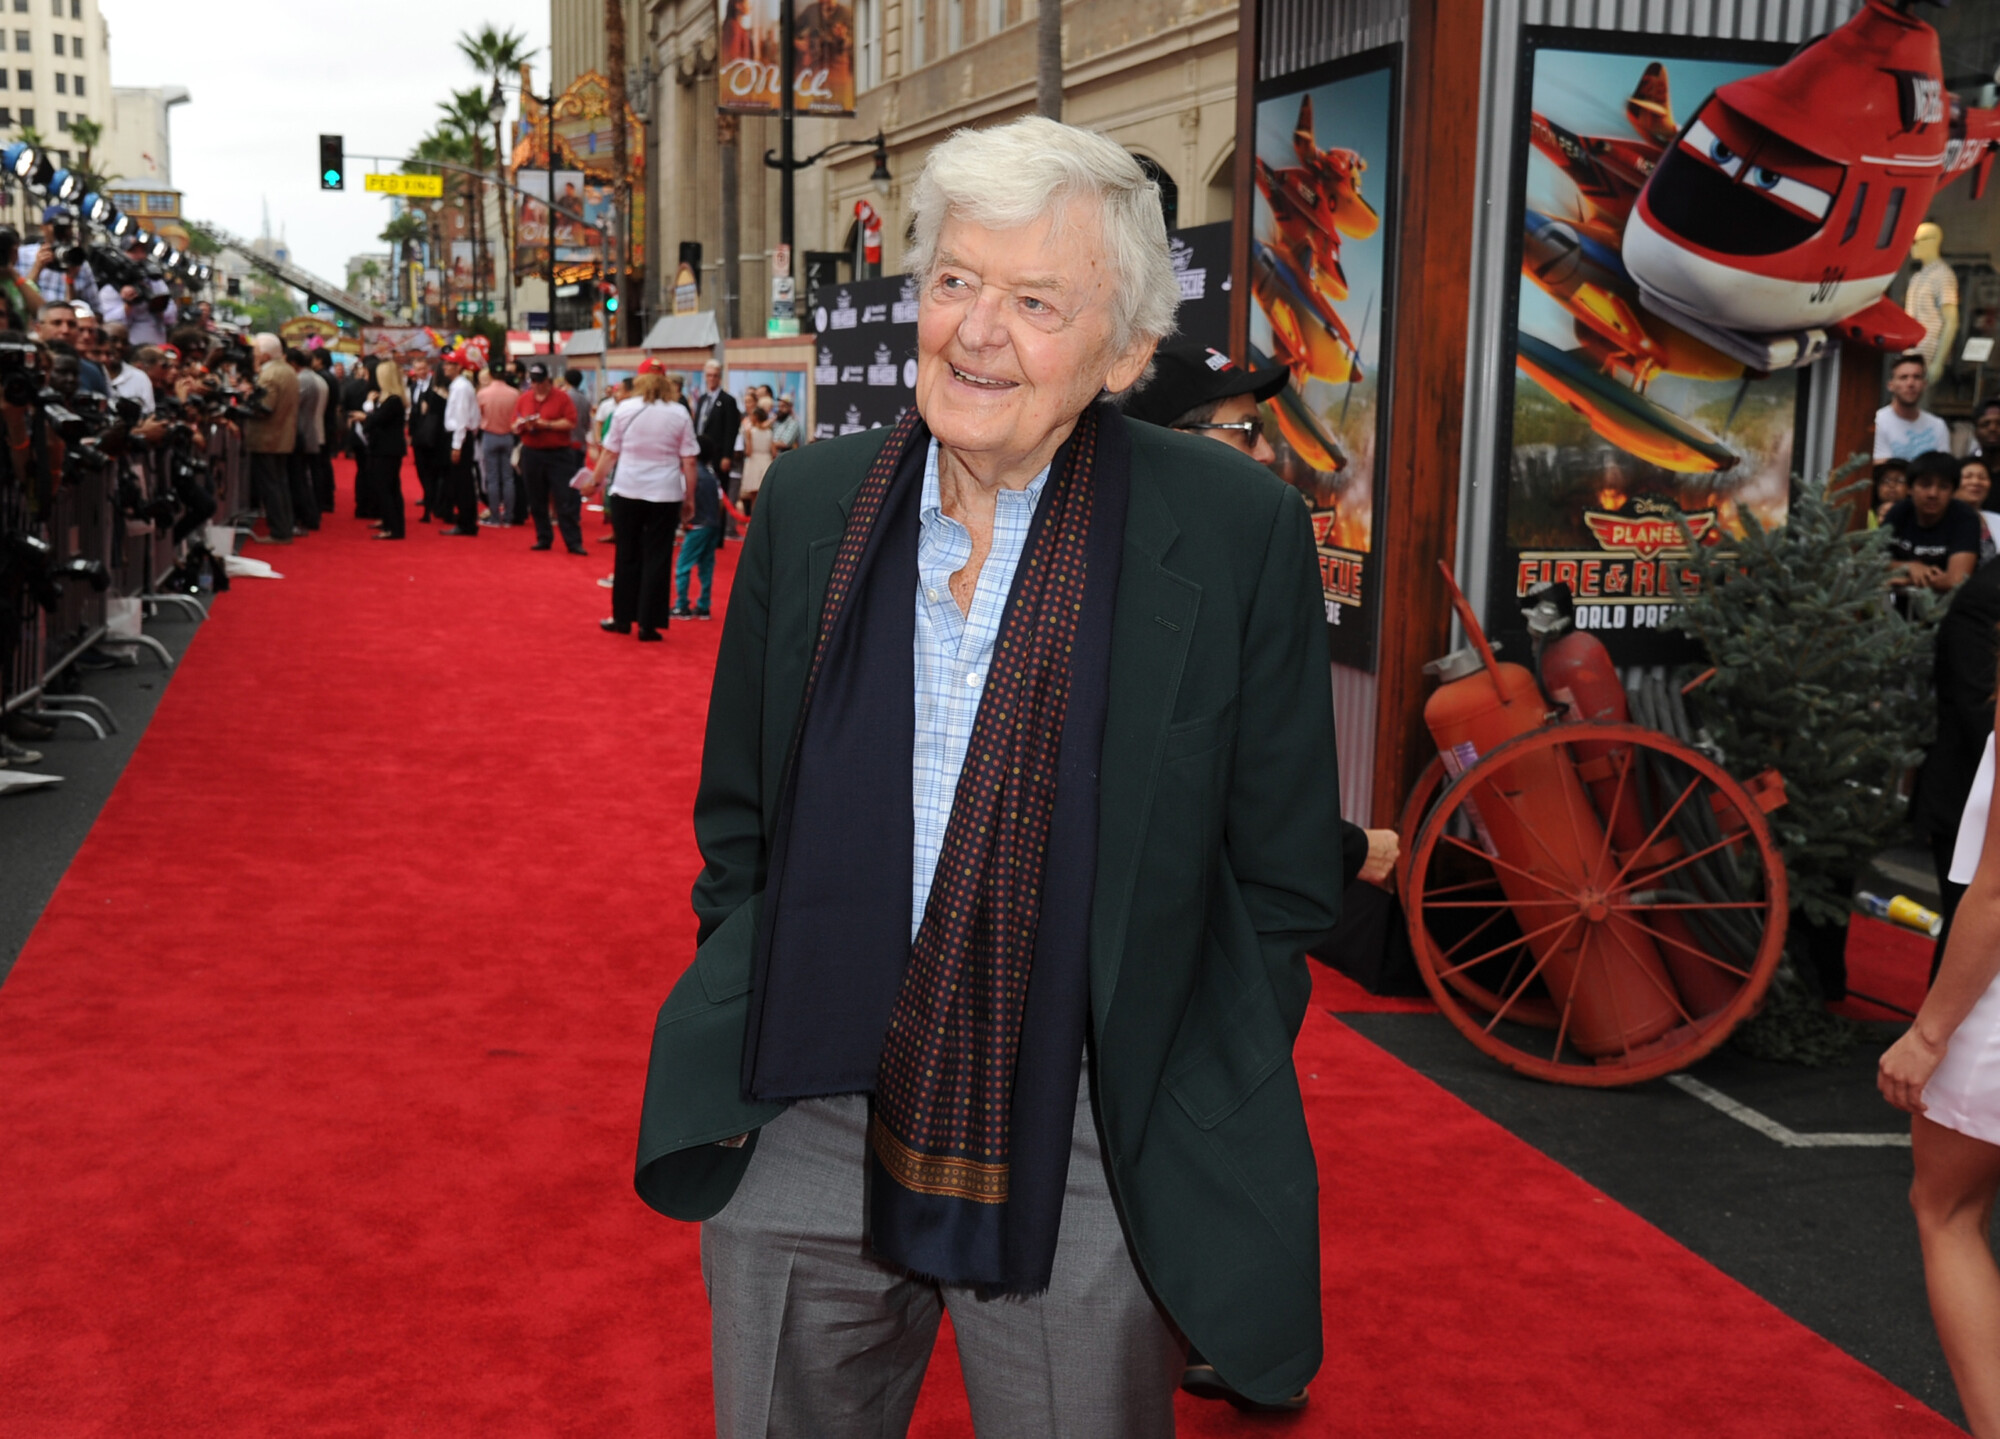 Hal Holbrook, Prolific Actor Who Played Twain, Dies at 95